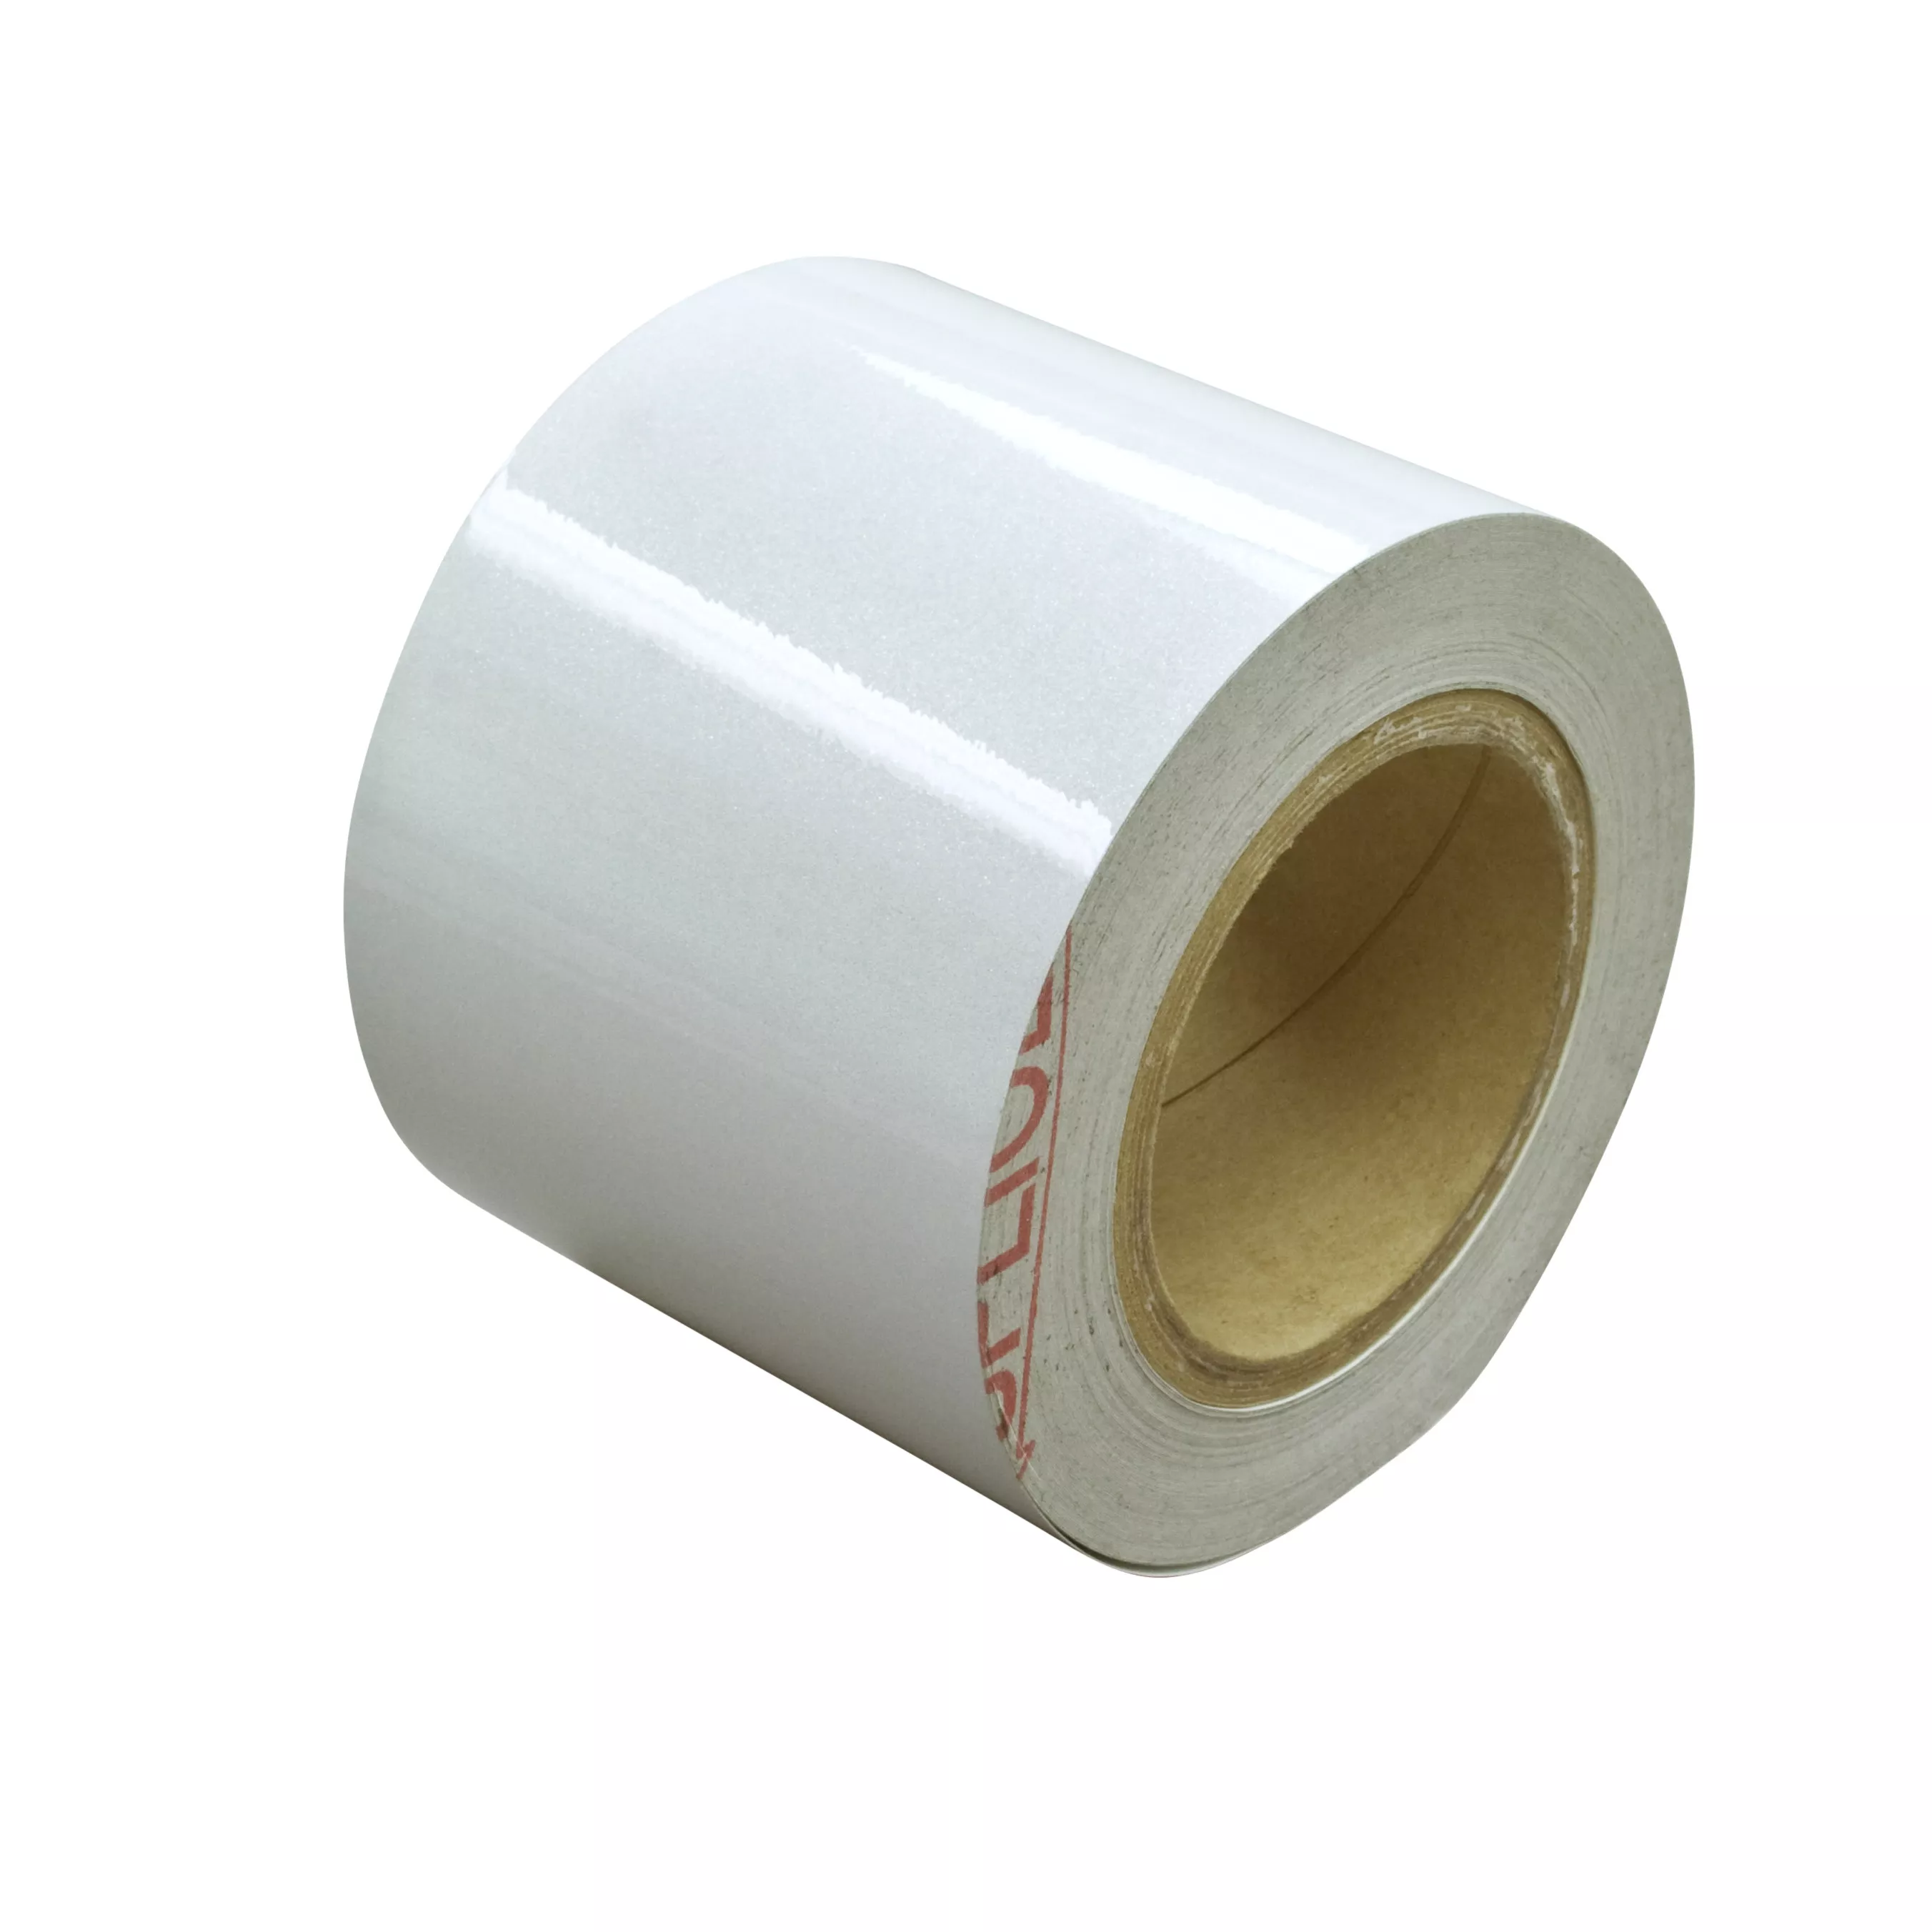 3M™ Thermal Transfer Label Material 3929, Bright Silver Gloss, 6 in x
150 yd, 1 Roll/Case